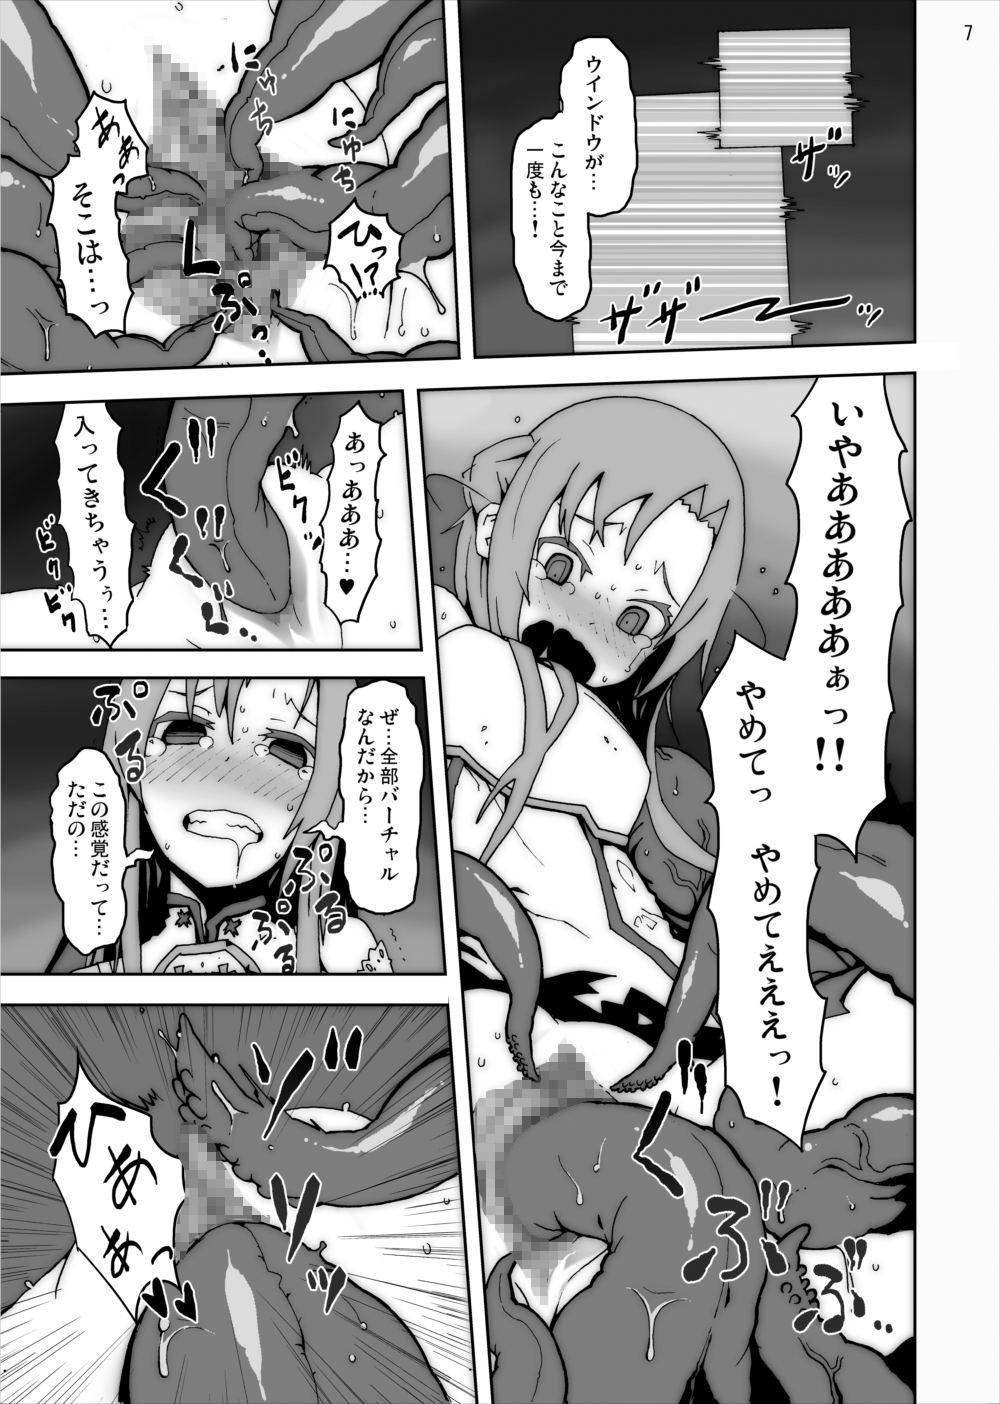 Abuse Asuna in Tentacle Party Rape Online - Sword art online Gay Smoking - Page 6